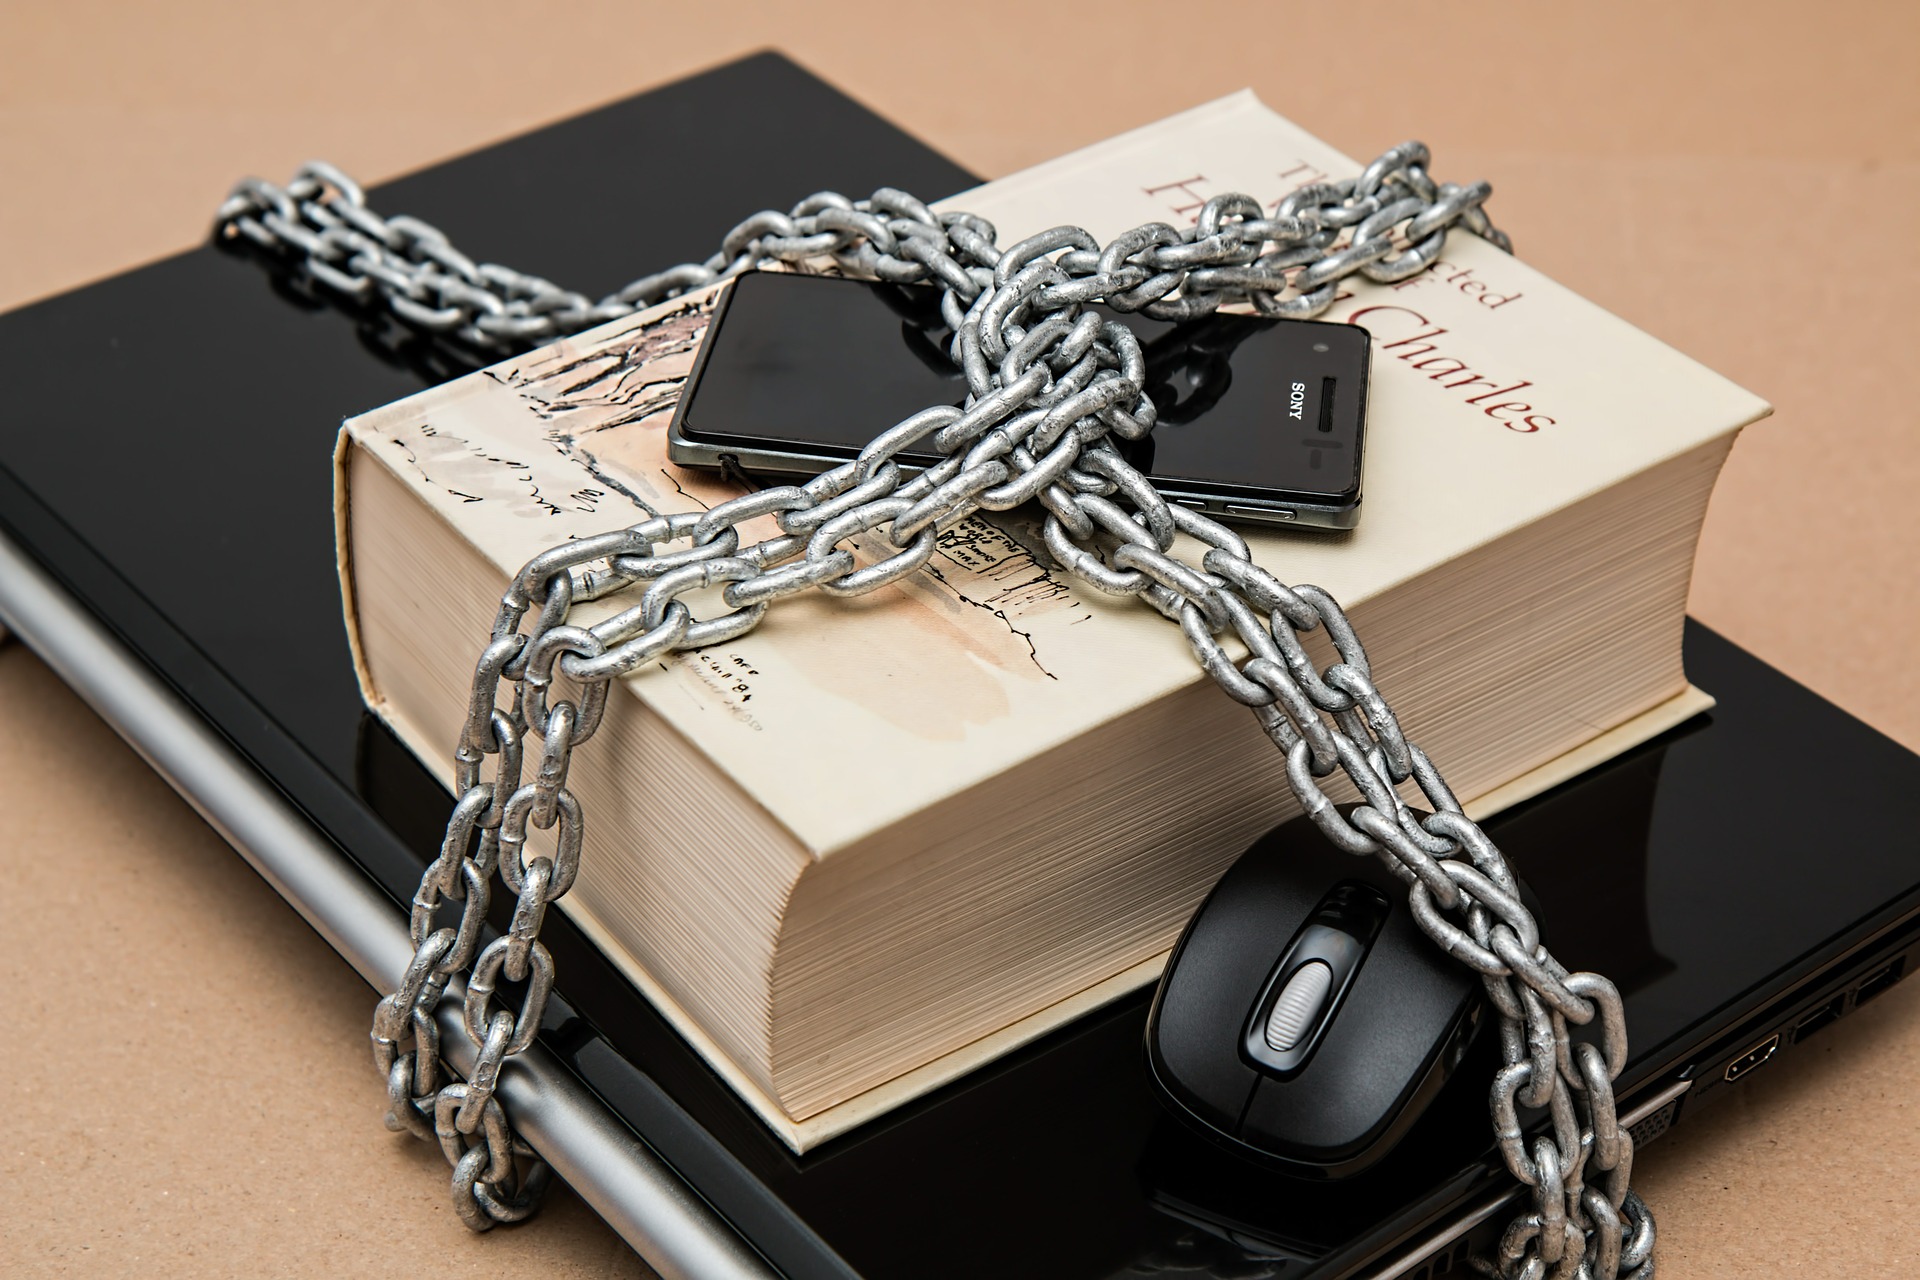 Mobile phone, book, and tablet chained together for mobile security